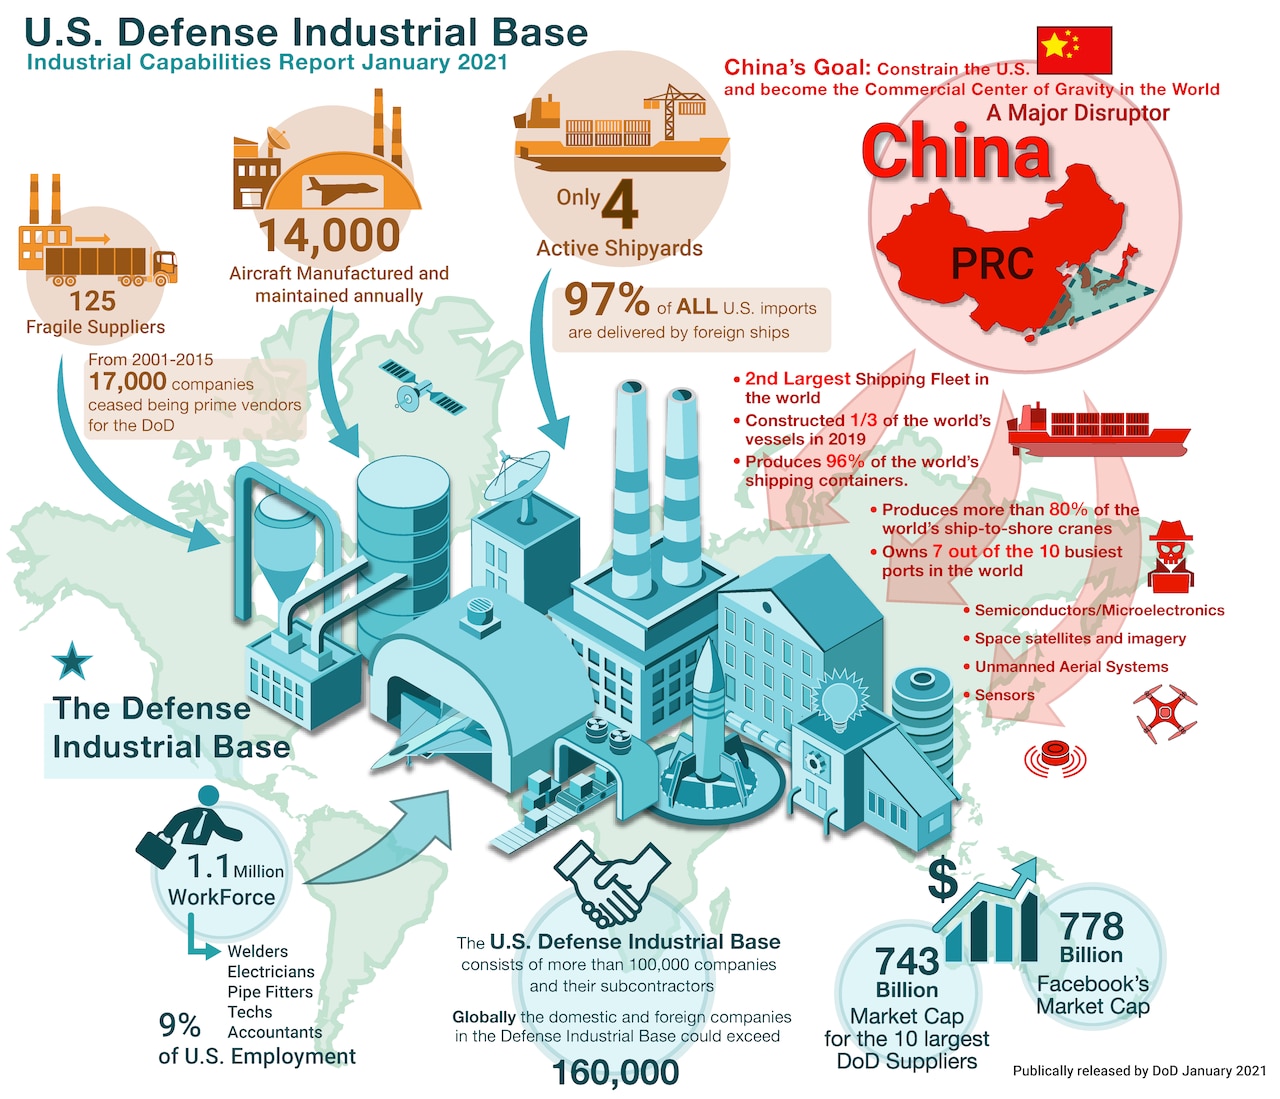 A graphic illustrates the capabilities of the U.S. industrial base and the disruptive effects of China's industrial base.